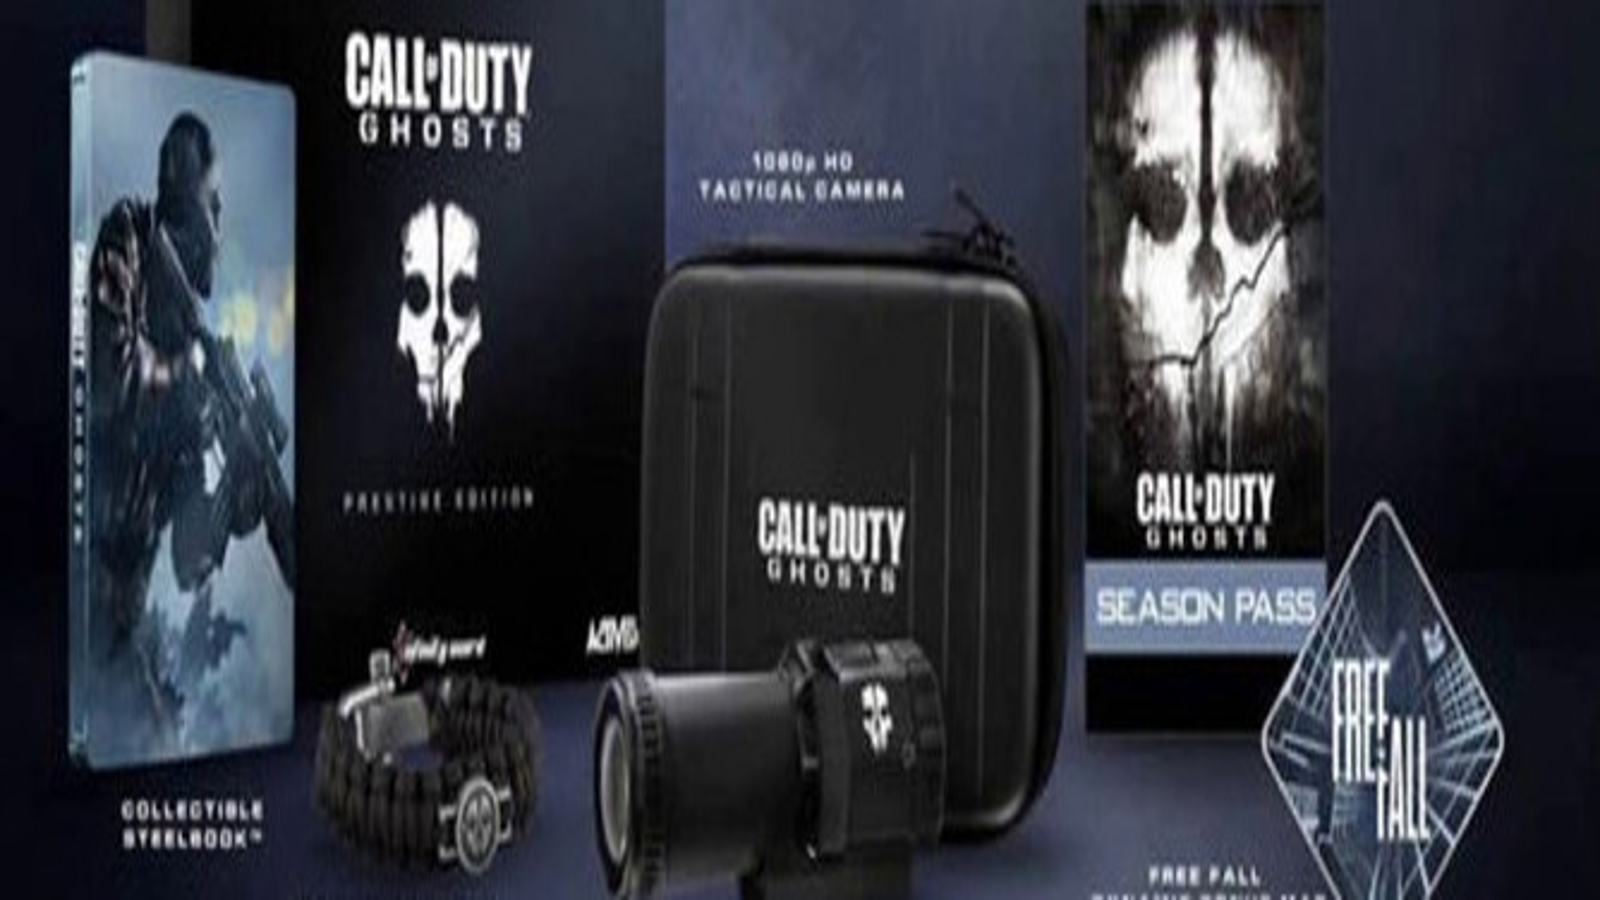 Call Of Duty Ghost Tactical Camera With Attachments New No Box, Original  Case